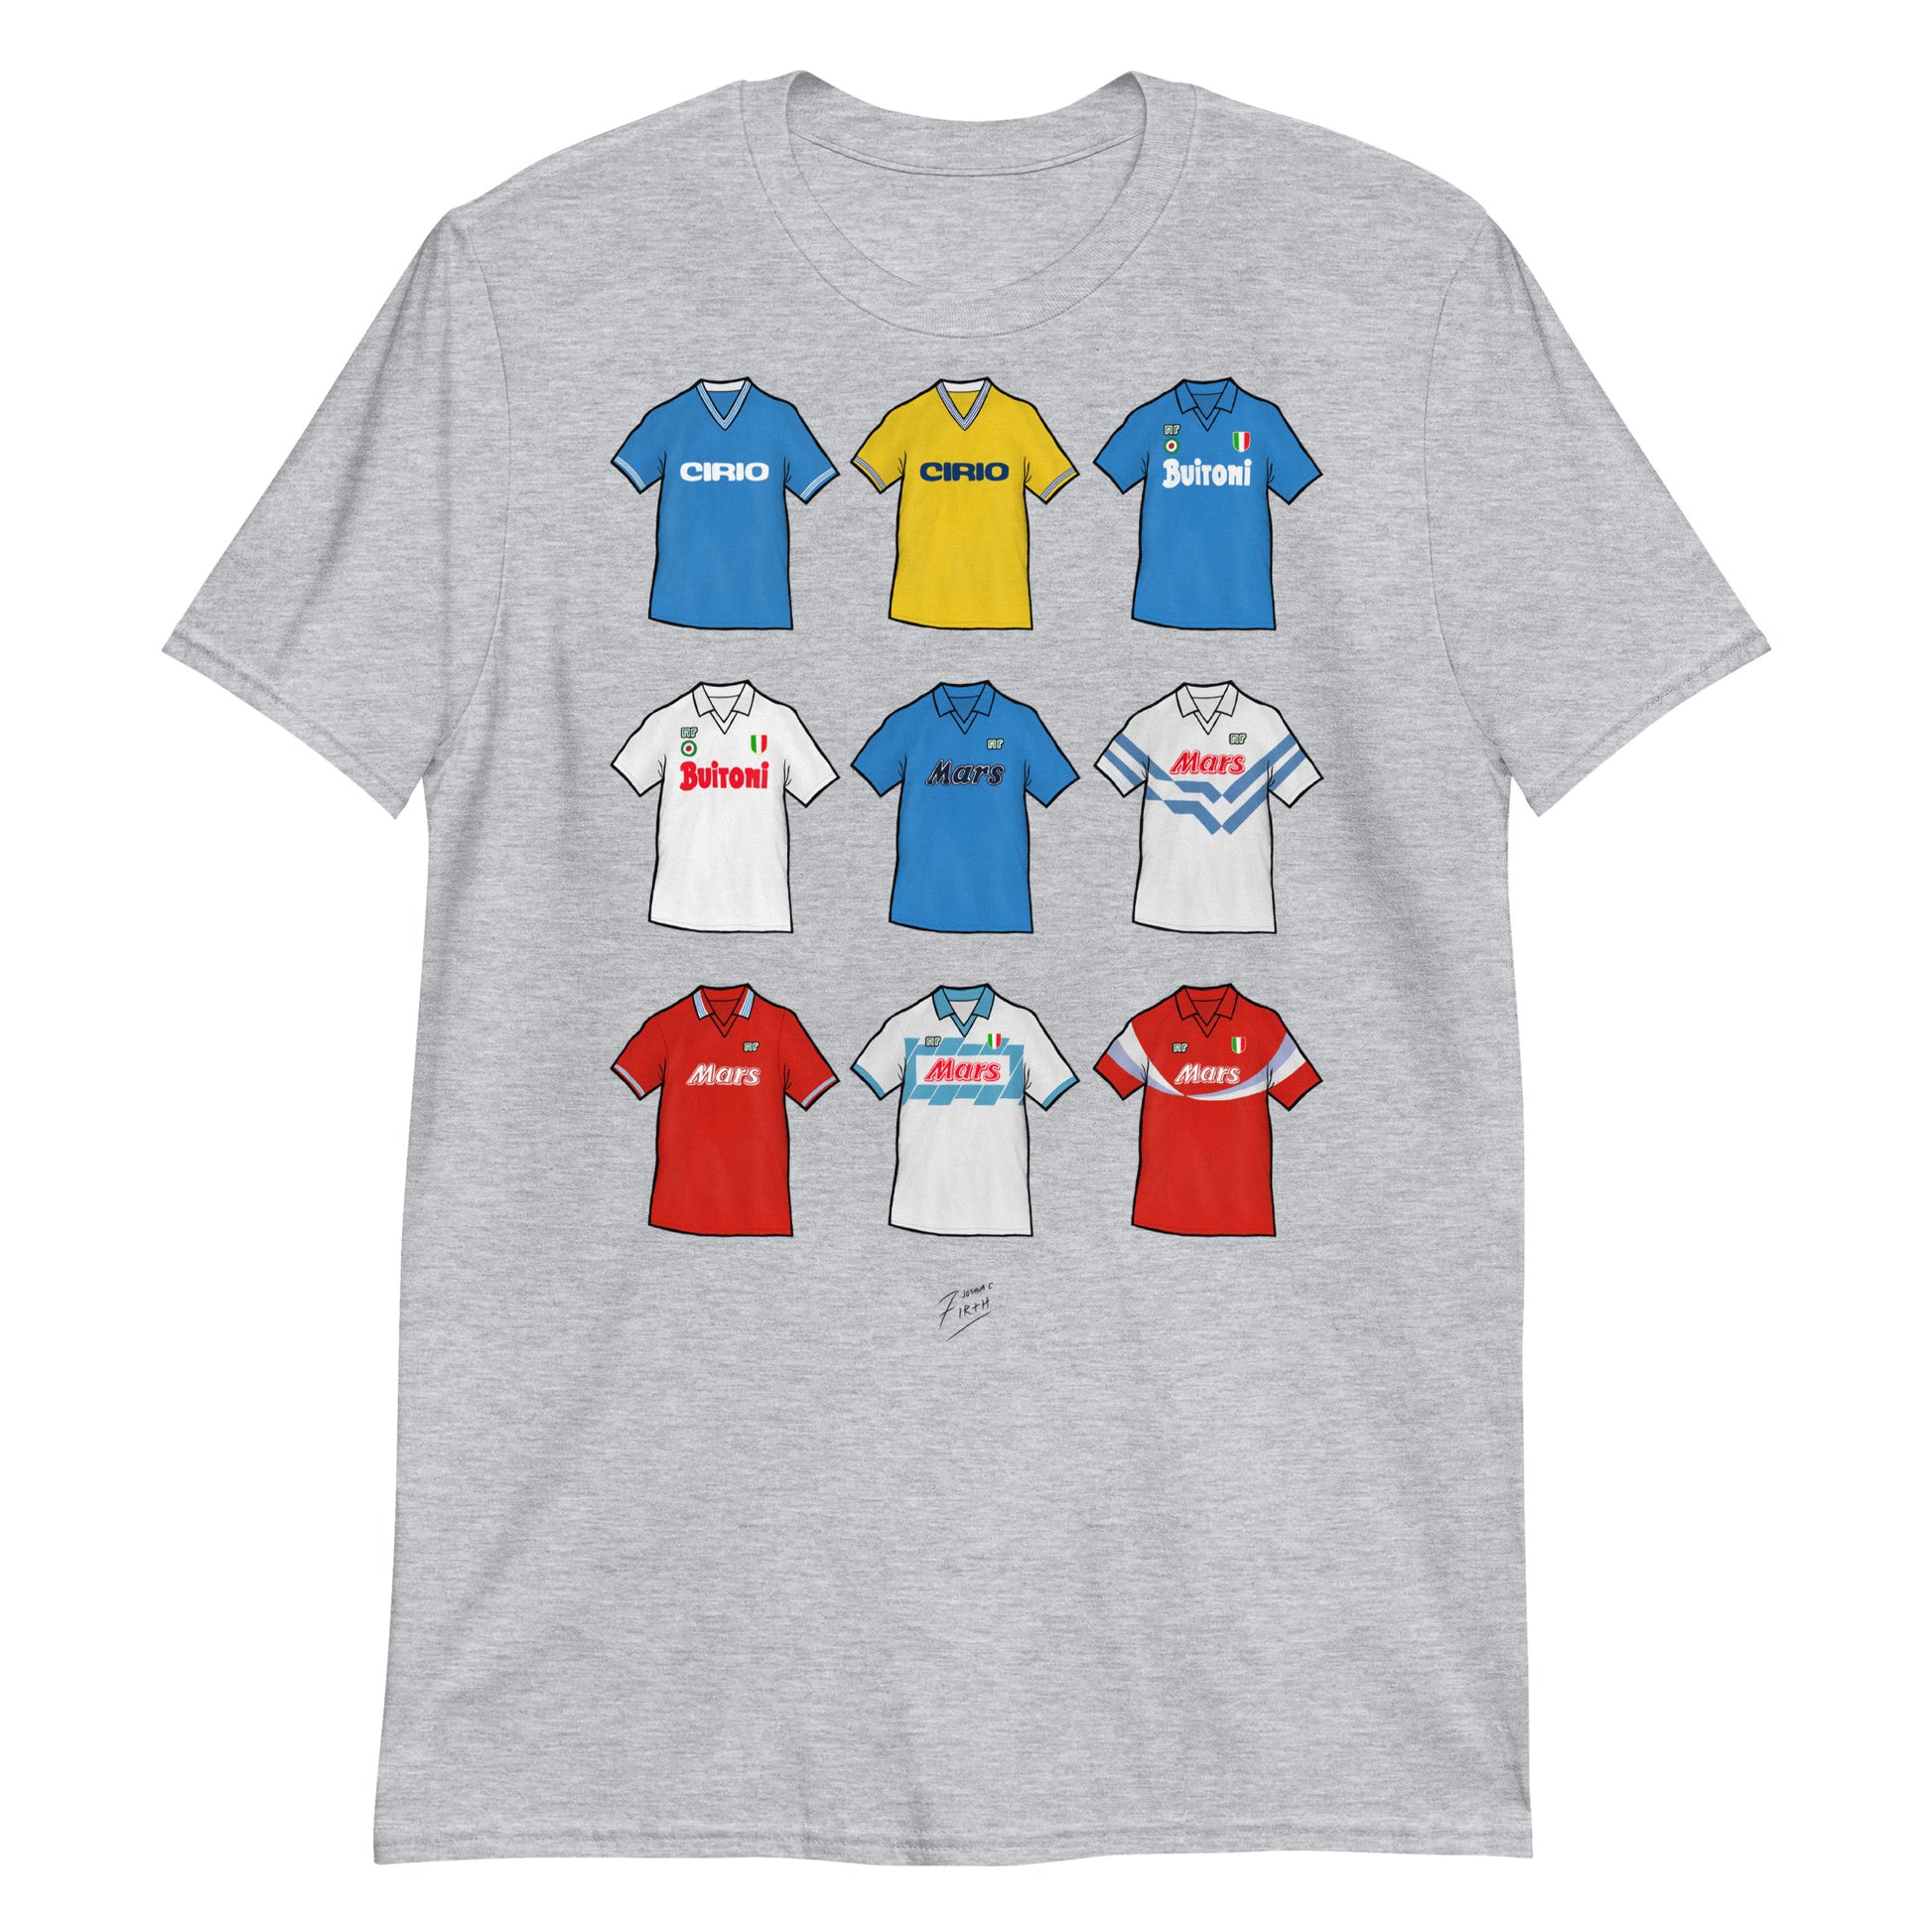 Light Grey Napoli Themed T-shirt inspired by the jerseys of the past from when Diego Maradona used to play for them!